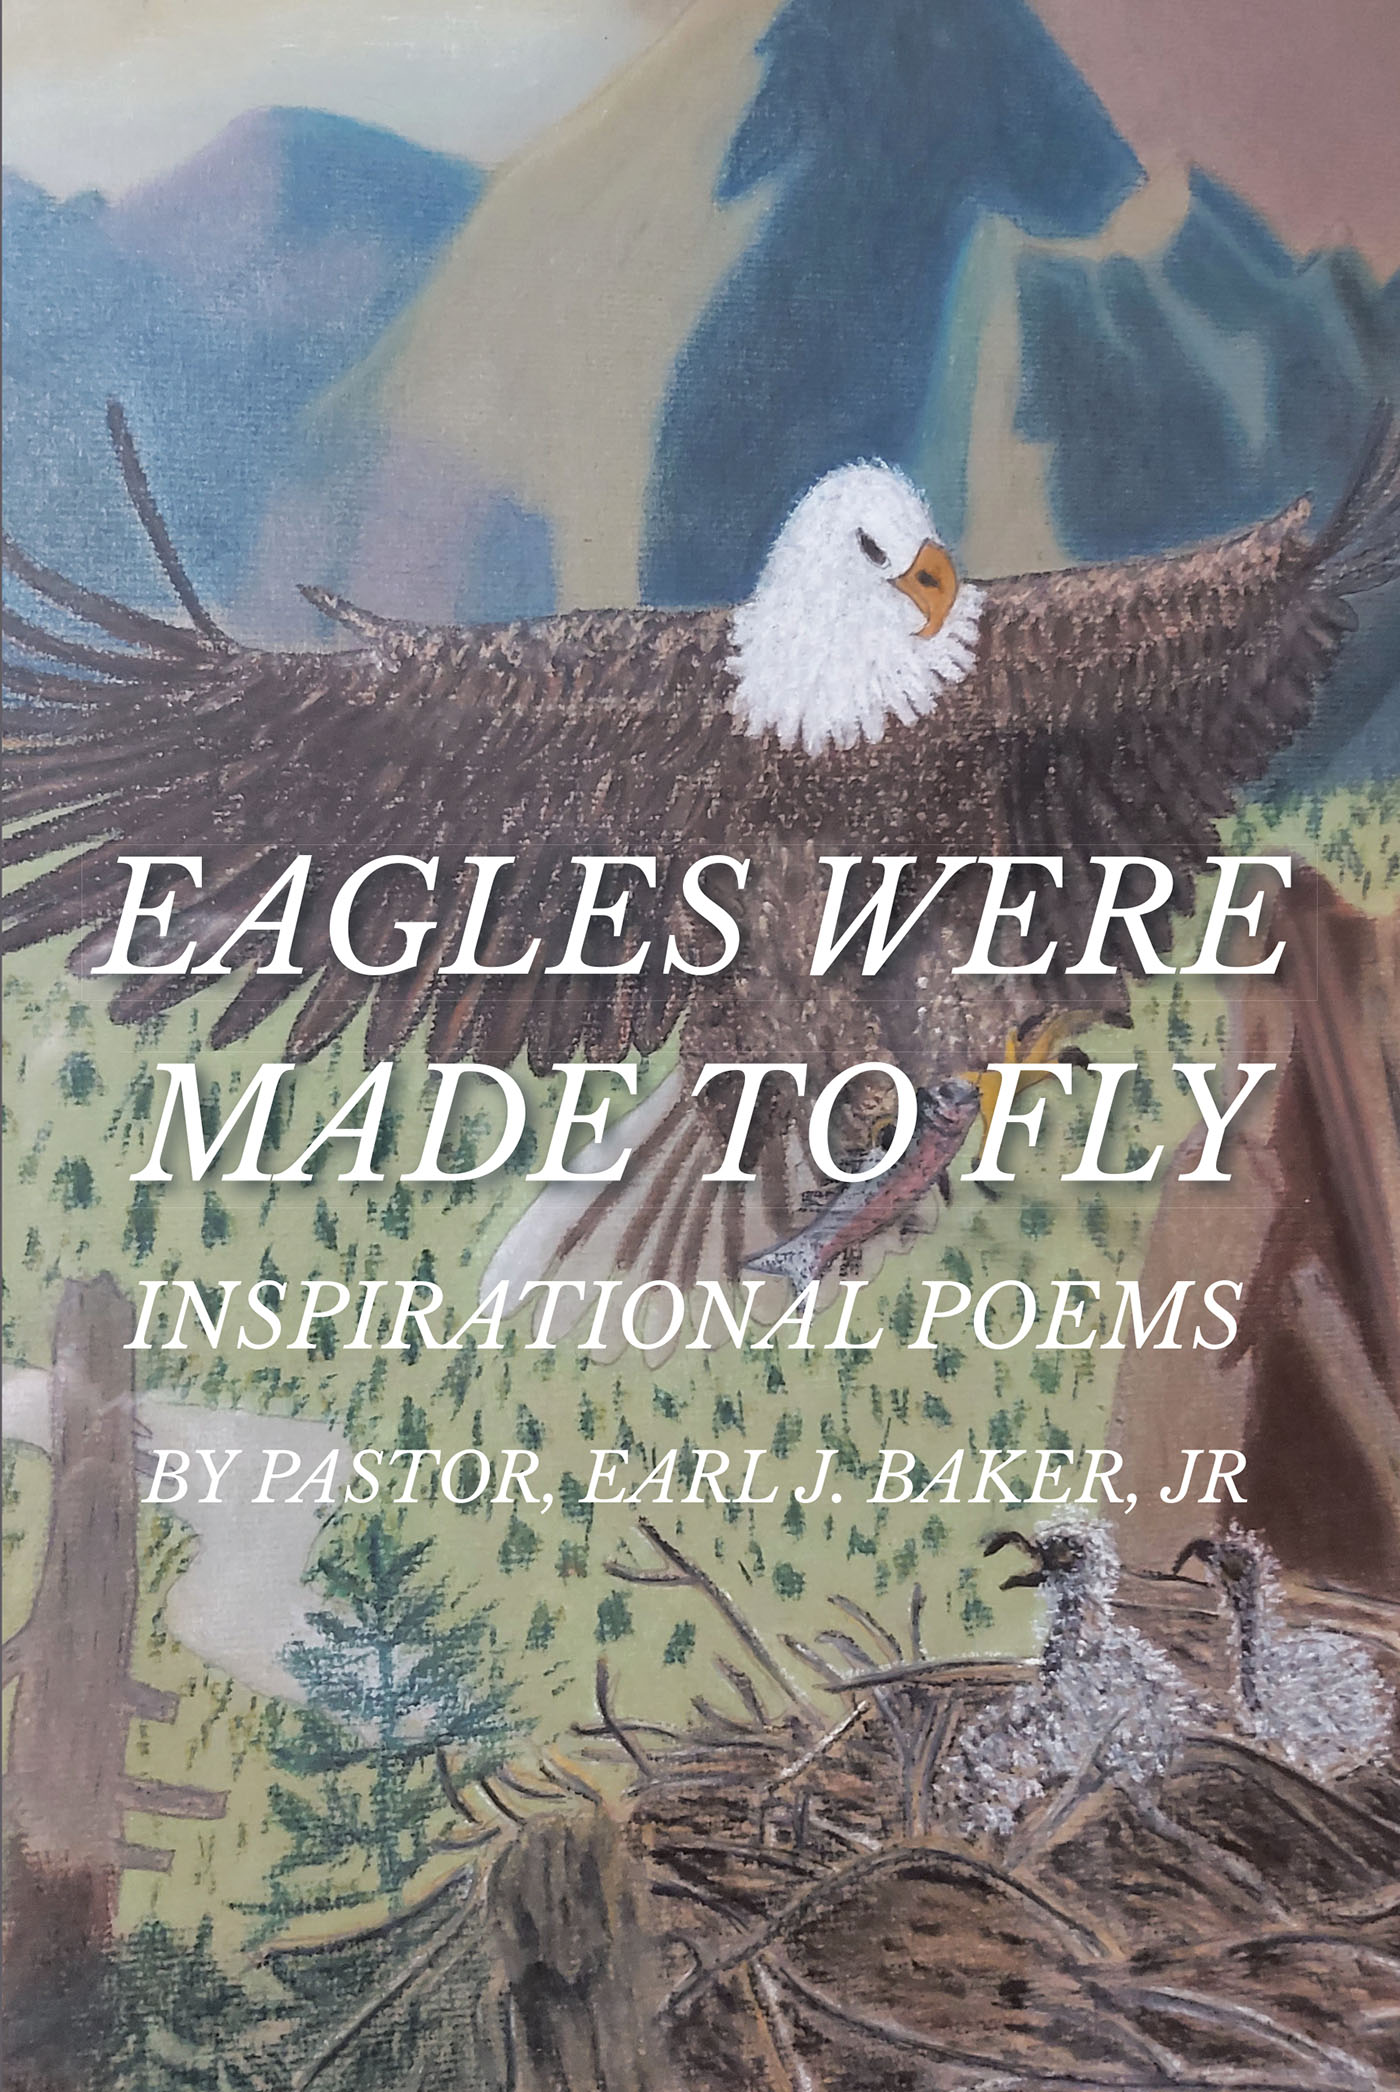 Pastor Earl J. Baker, Jr’s Newly Released "Eagles Were Made To Fly" is an Uplifting Collection of Deeply Inspiring Poetic Works